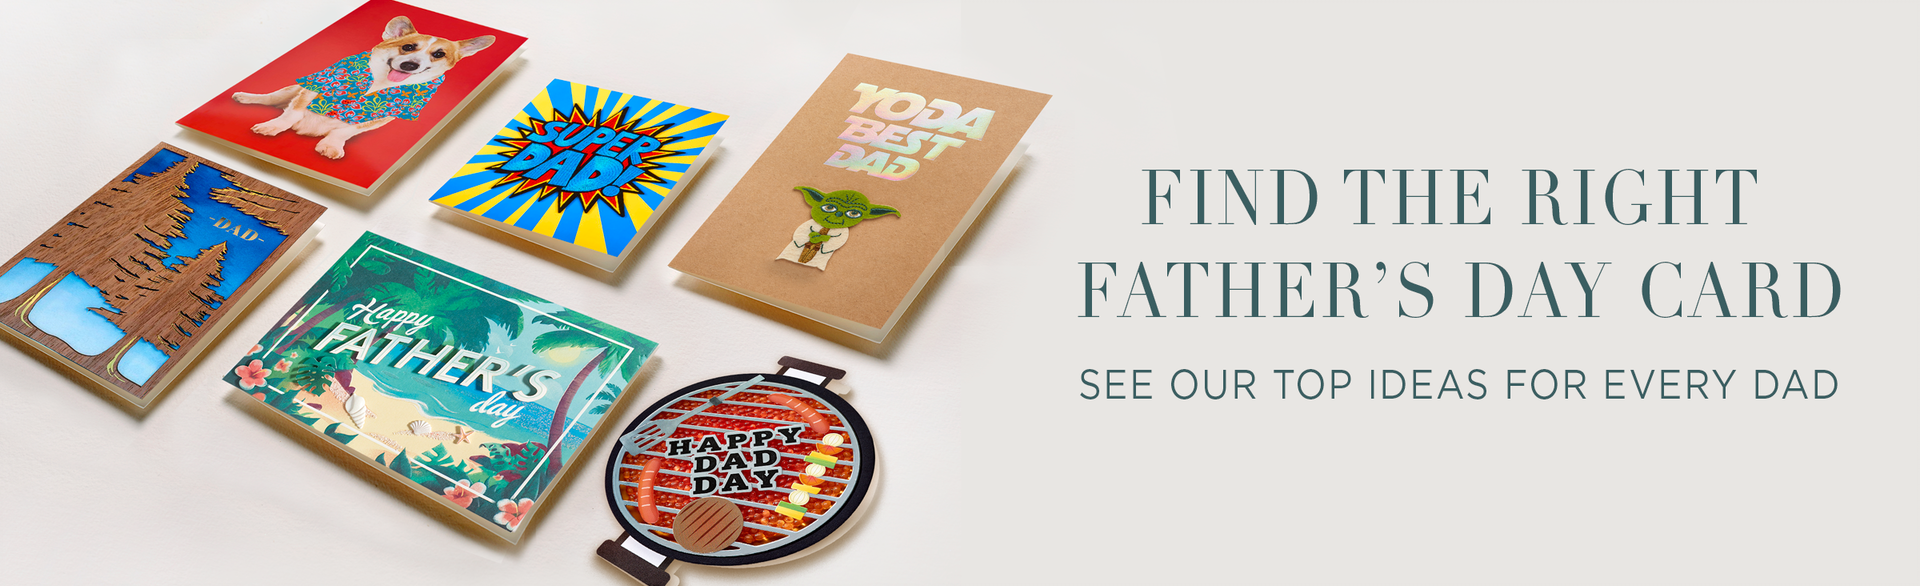 Find the right Father's Day card see our top ideas for dad